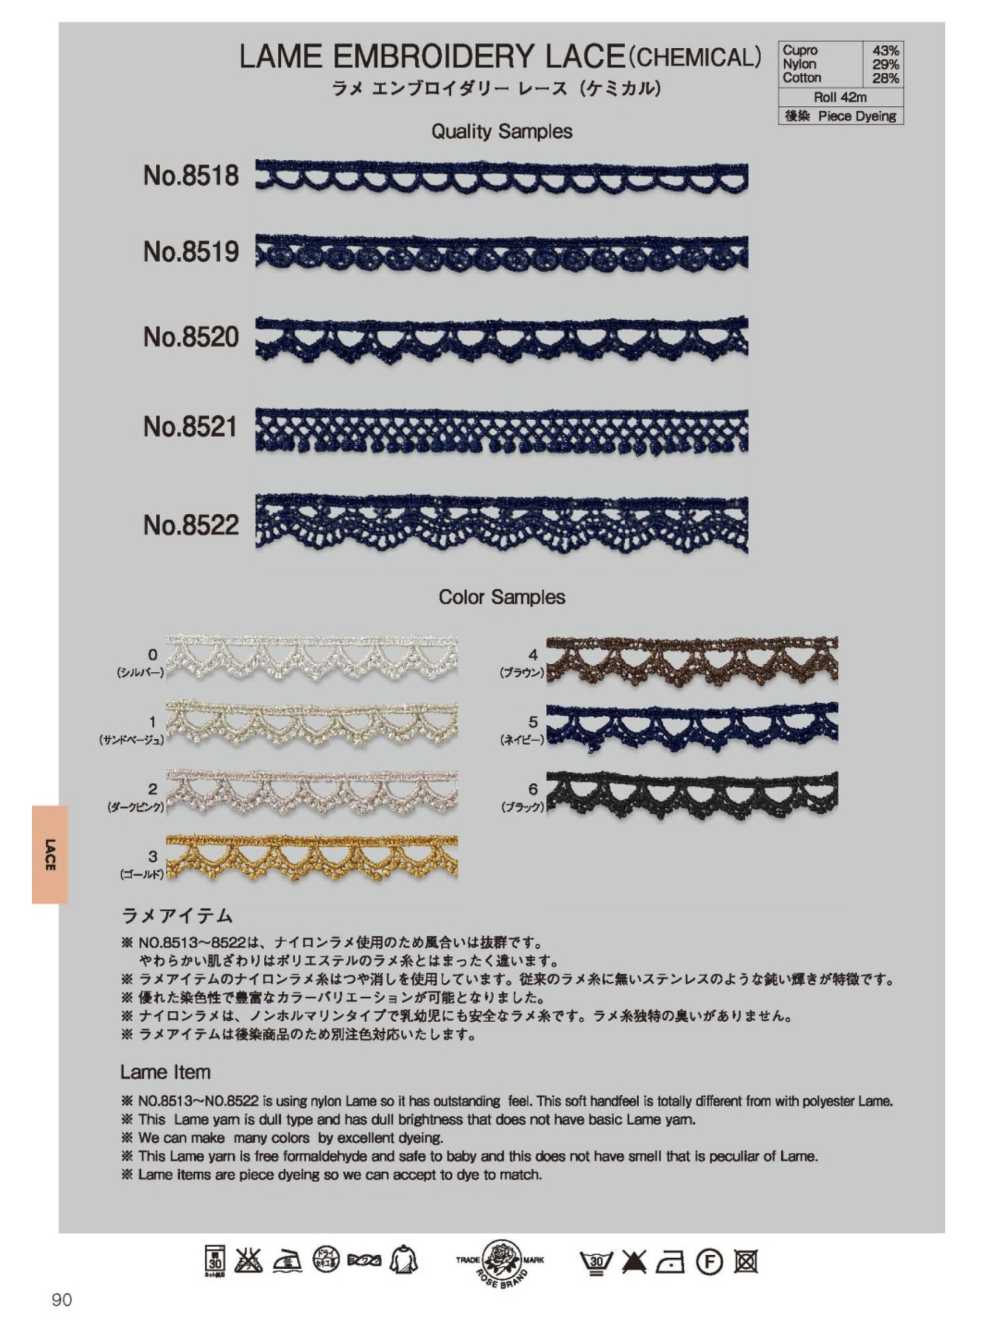 8518 Lame Embroidered Lace(Chemical) ROSE BRAND (Marushin)